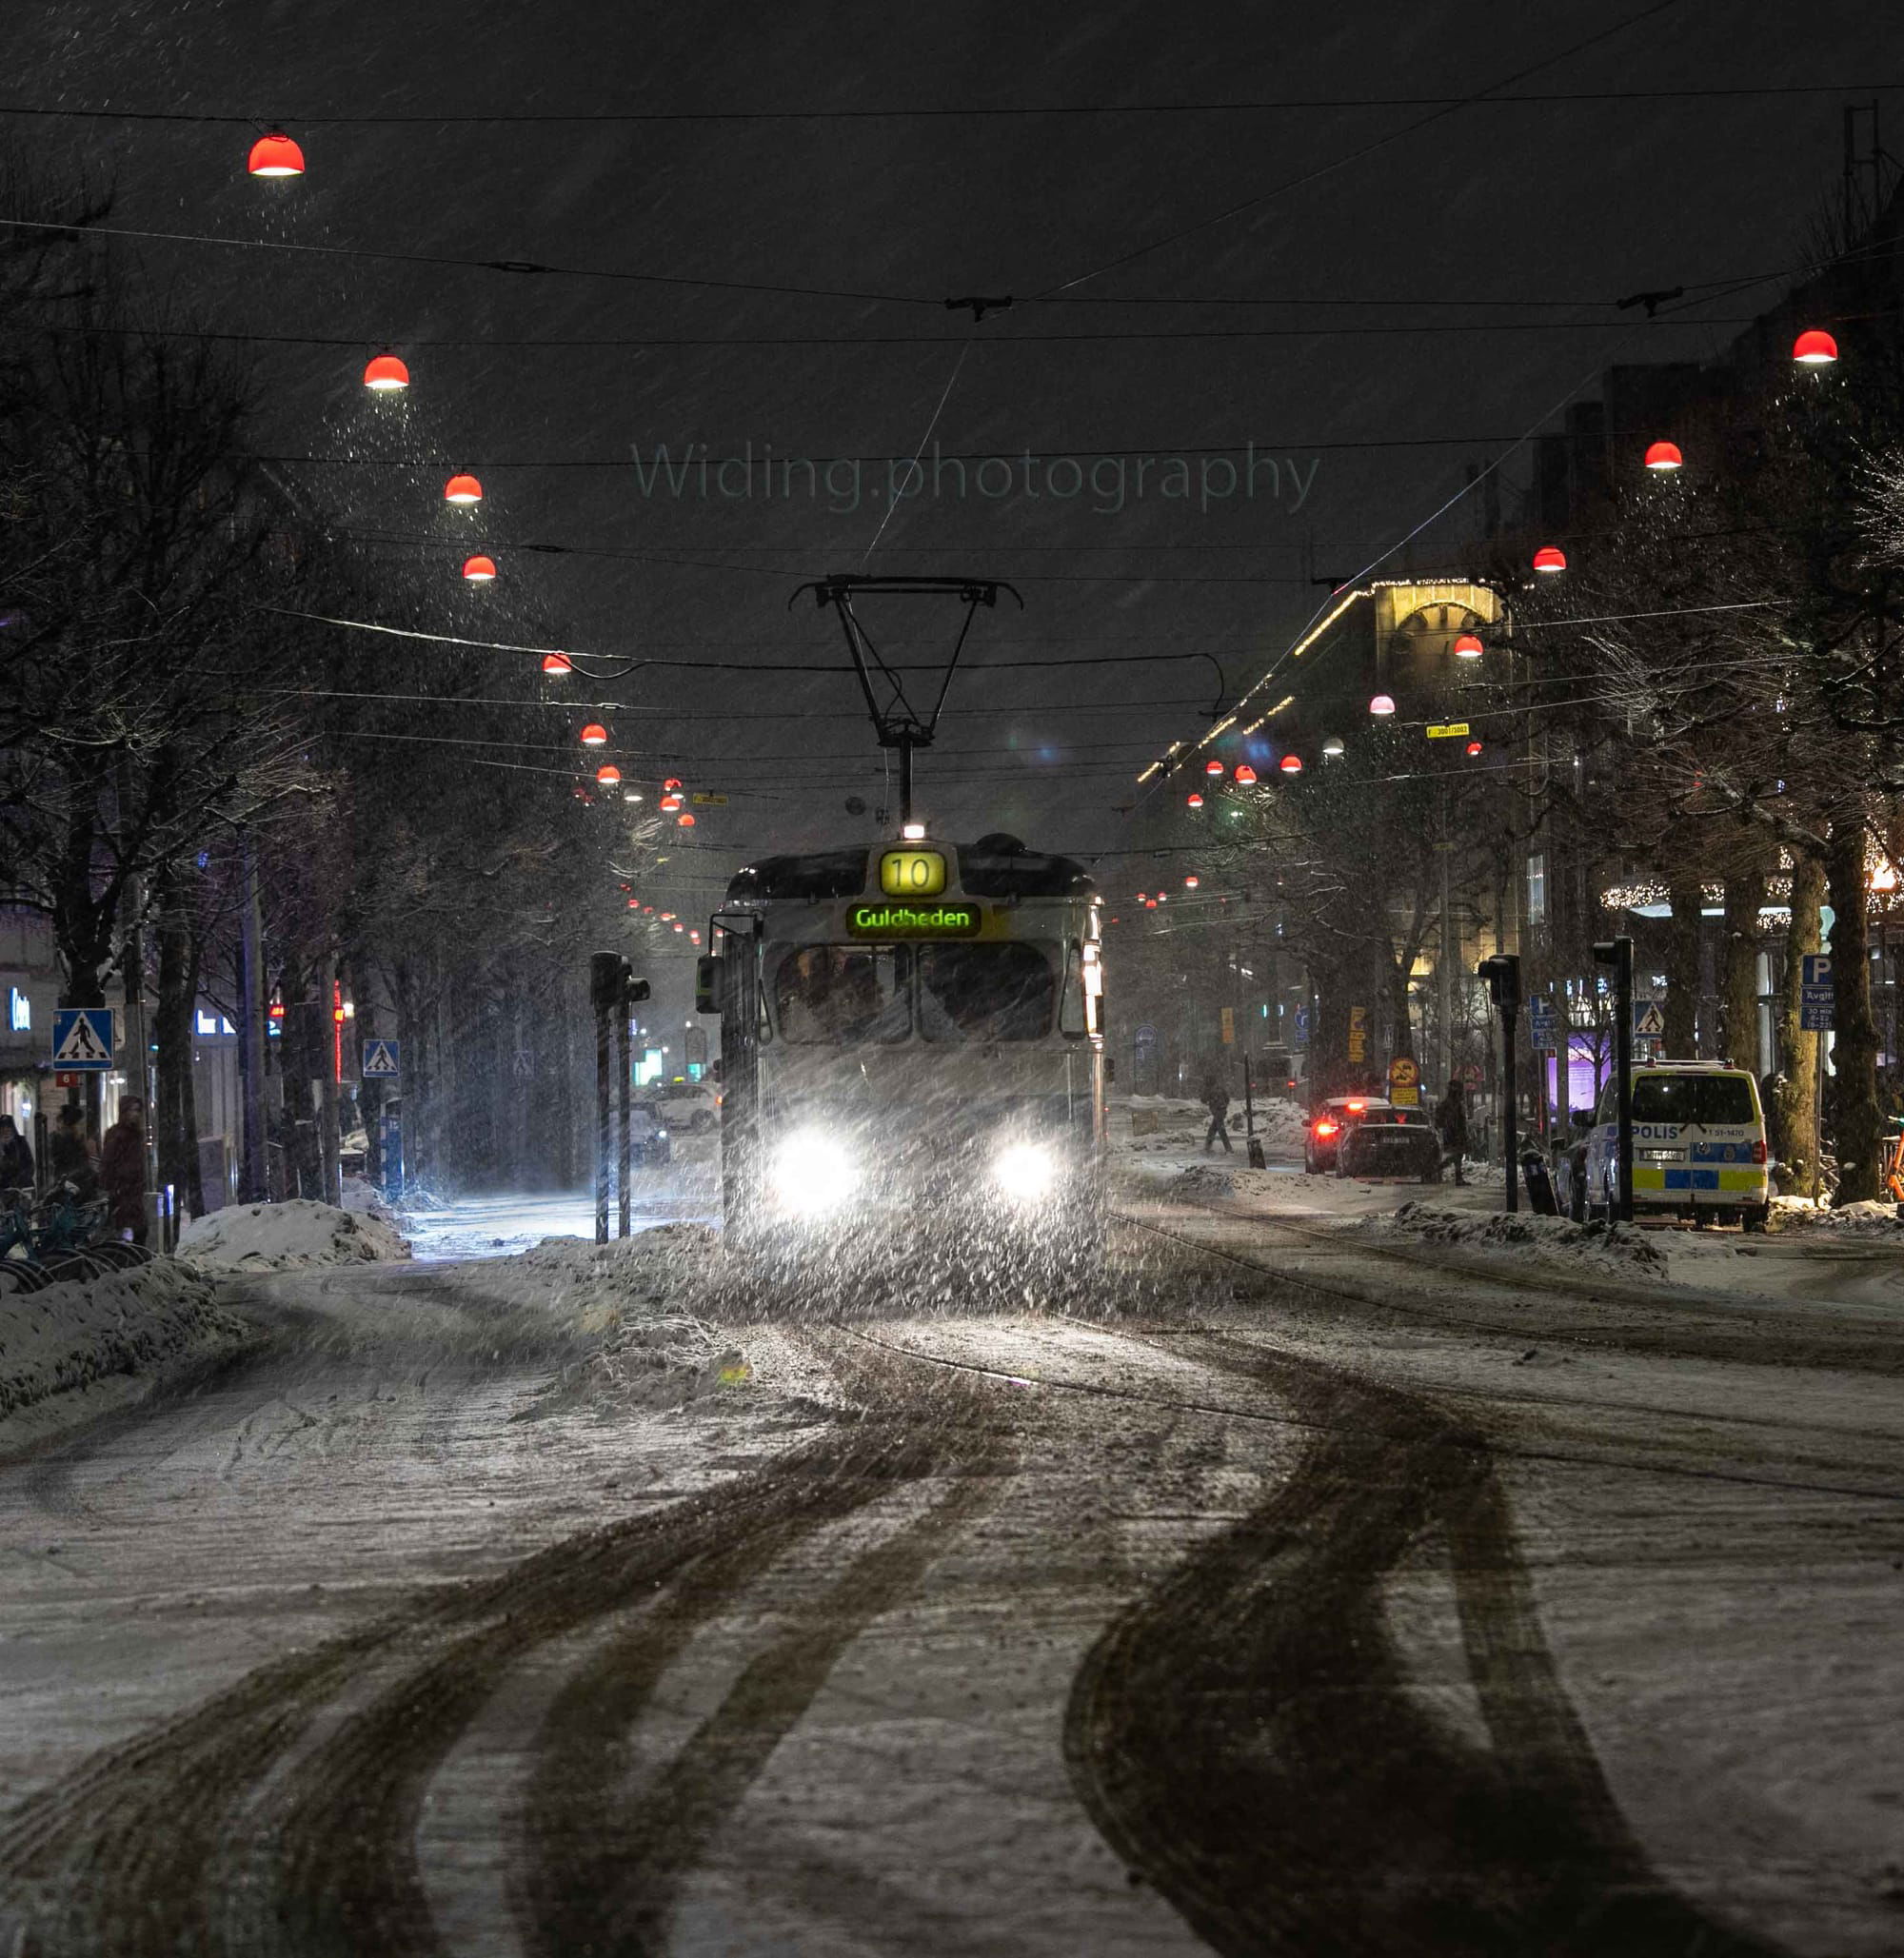 The City of Gothenburg, A snowy afternoon in December